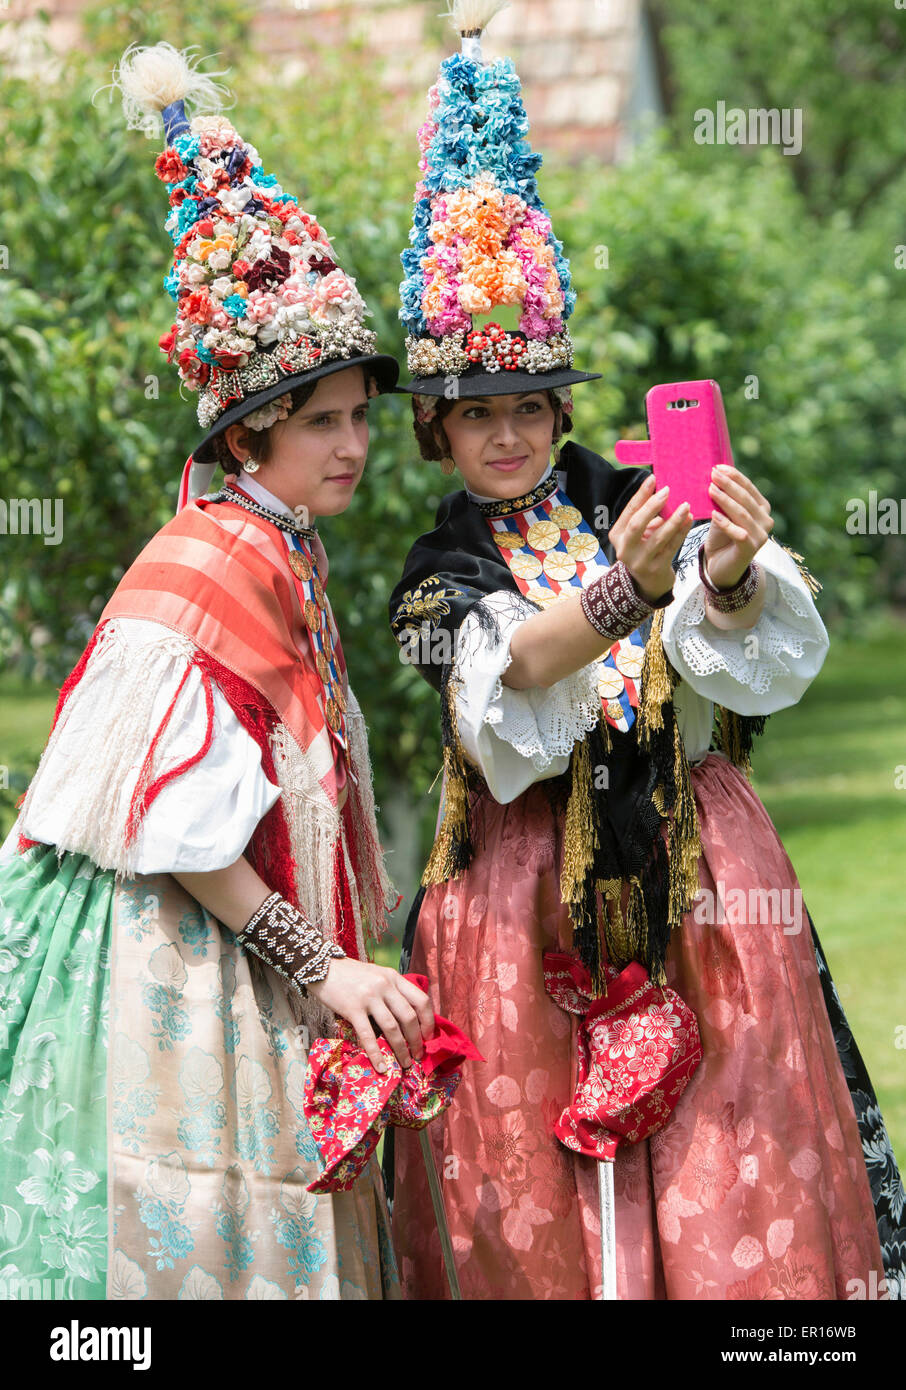 Gorjani, Eastern Croatia. 24th May, 2015. Young girls wearing traditional  folk costumes perform during the annual